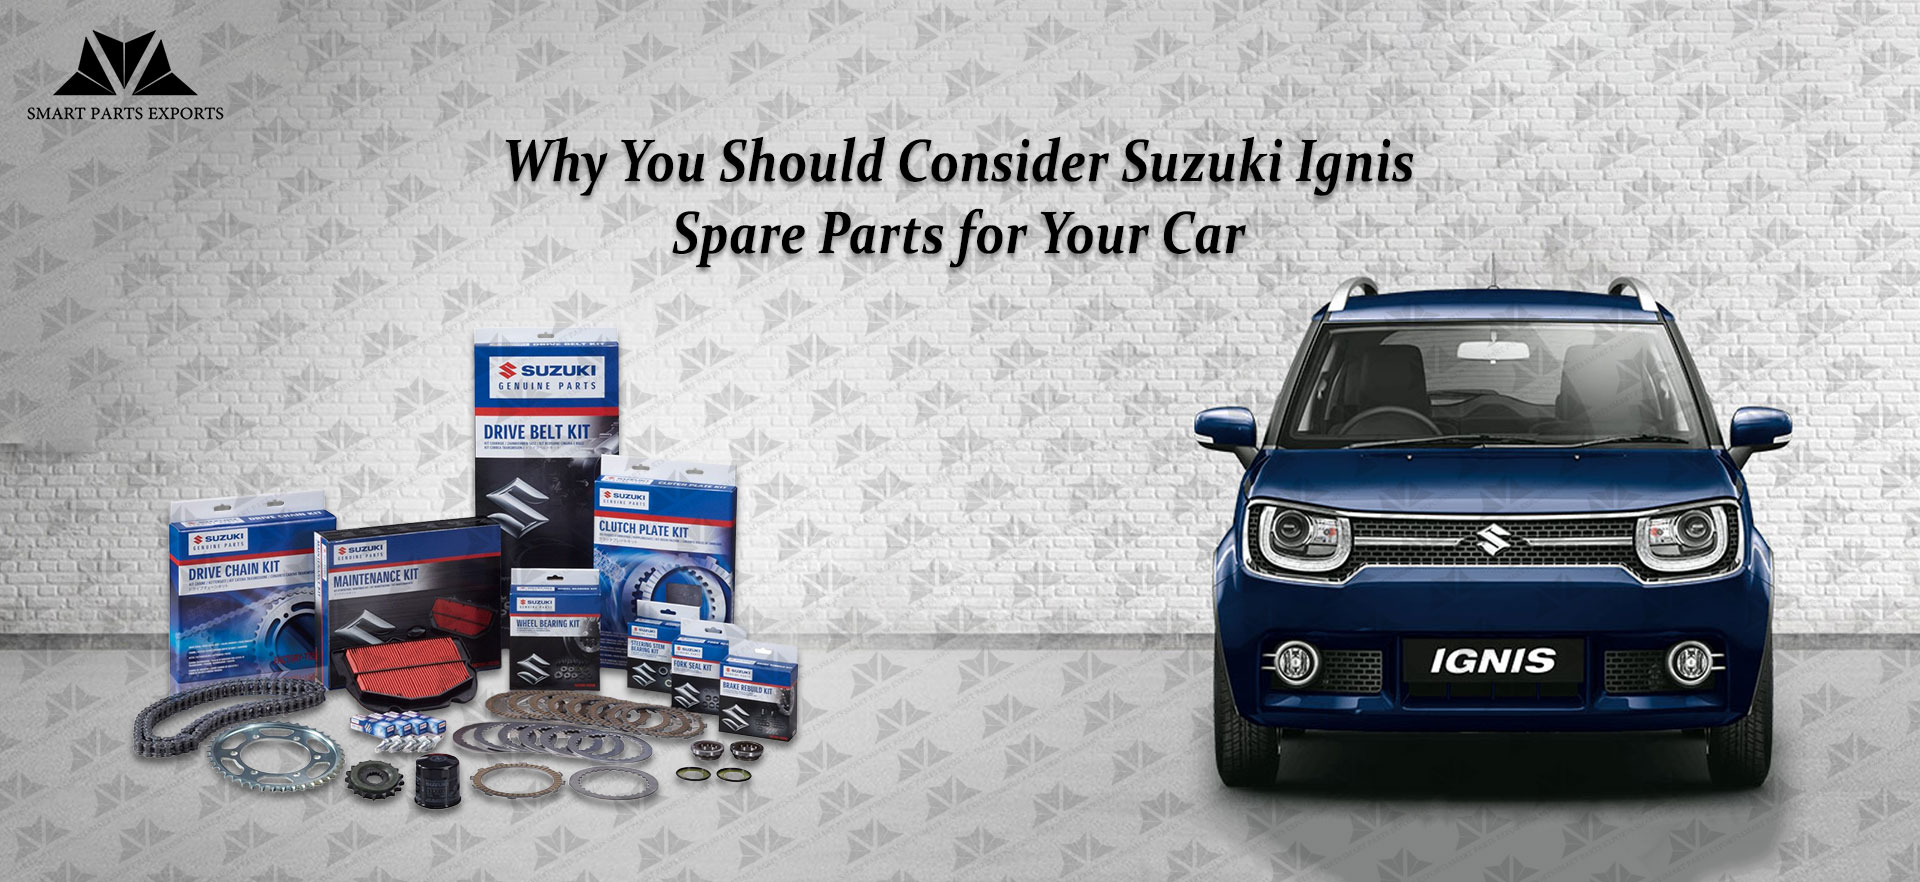 Why You Should Consider Suzuki Ignis Spare Parts for Your Car